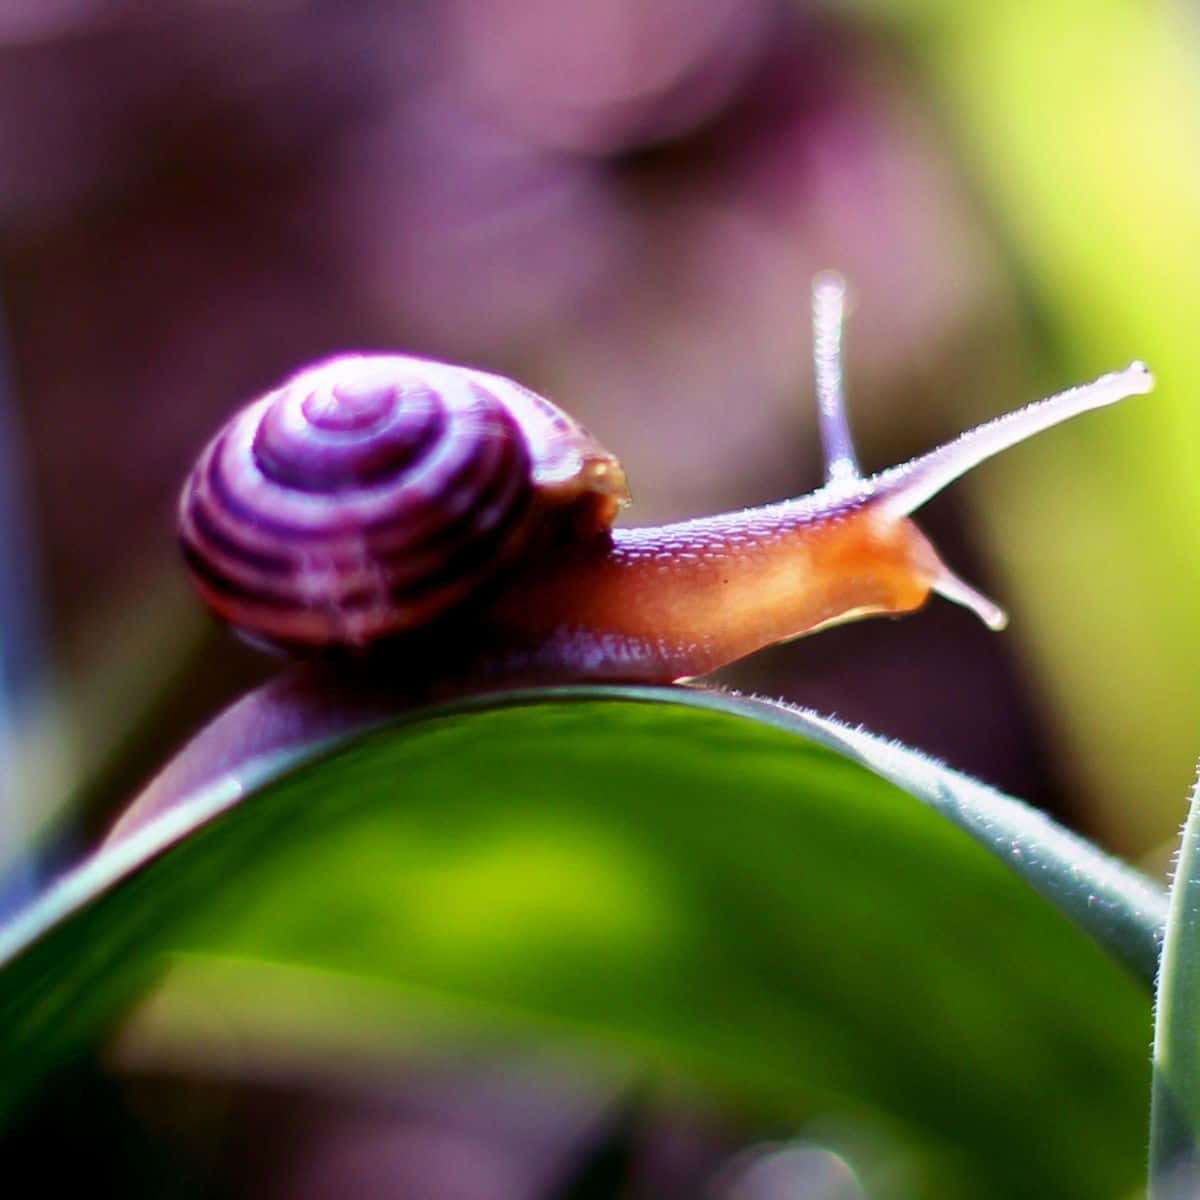 This snail is taking its own sweet time.